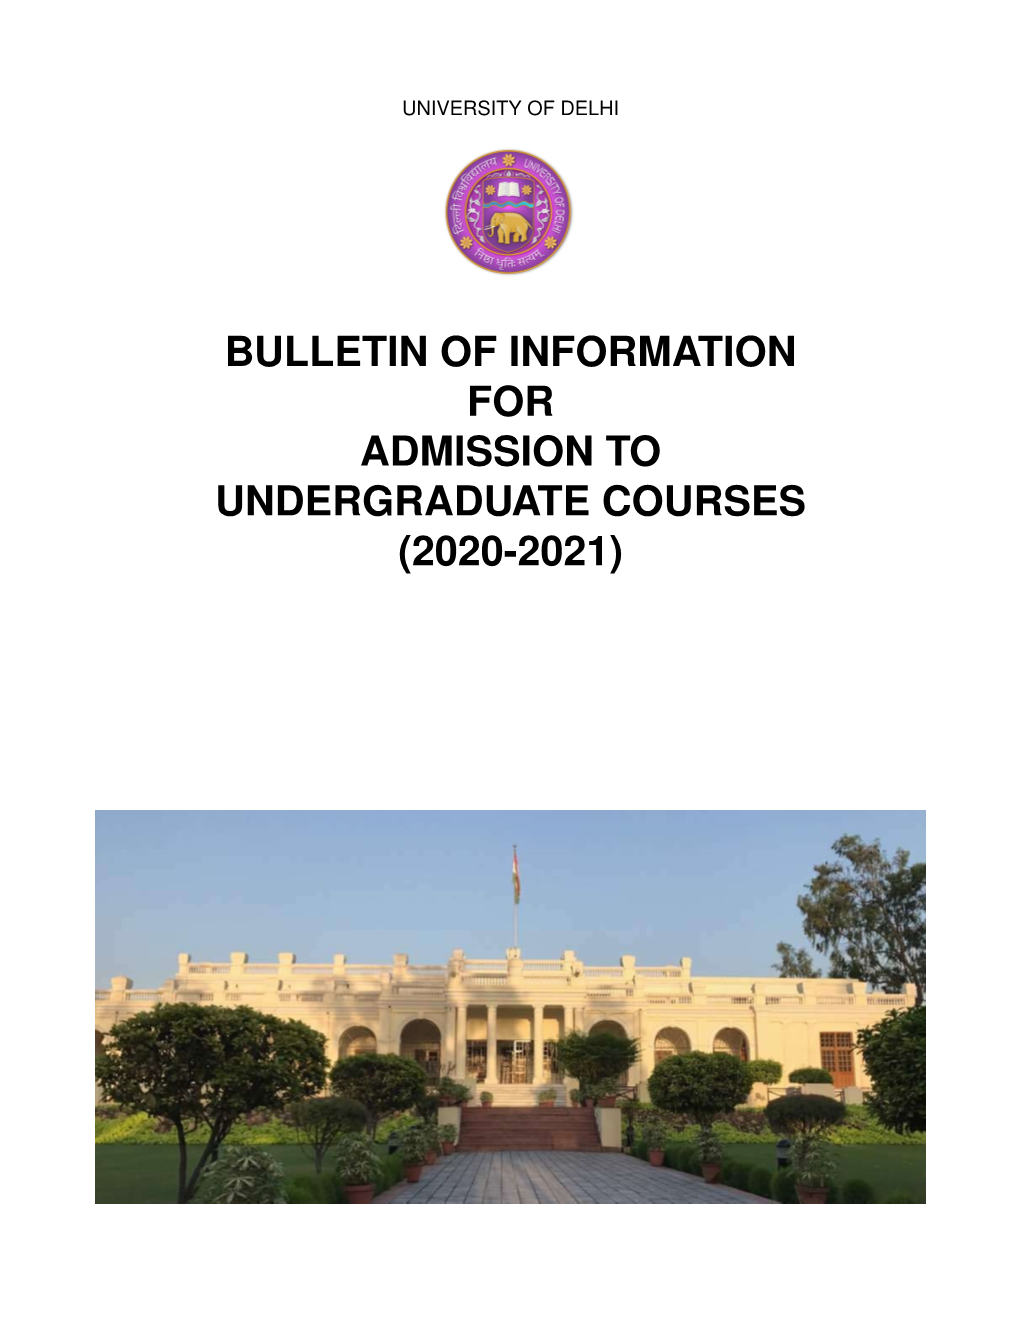 Bulletin of Information for Admission to Undergraduate Courses (2020-2021)